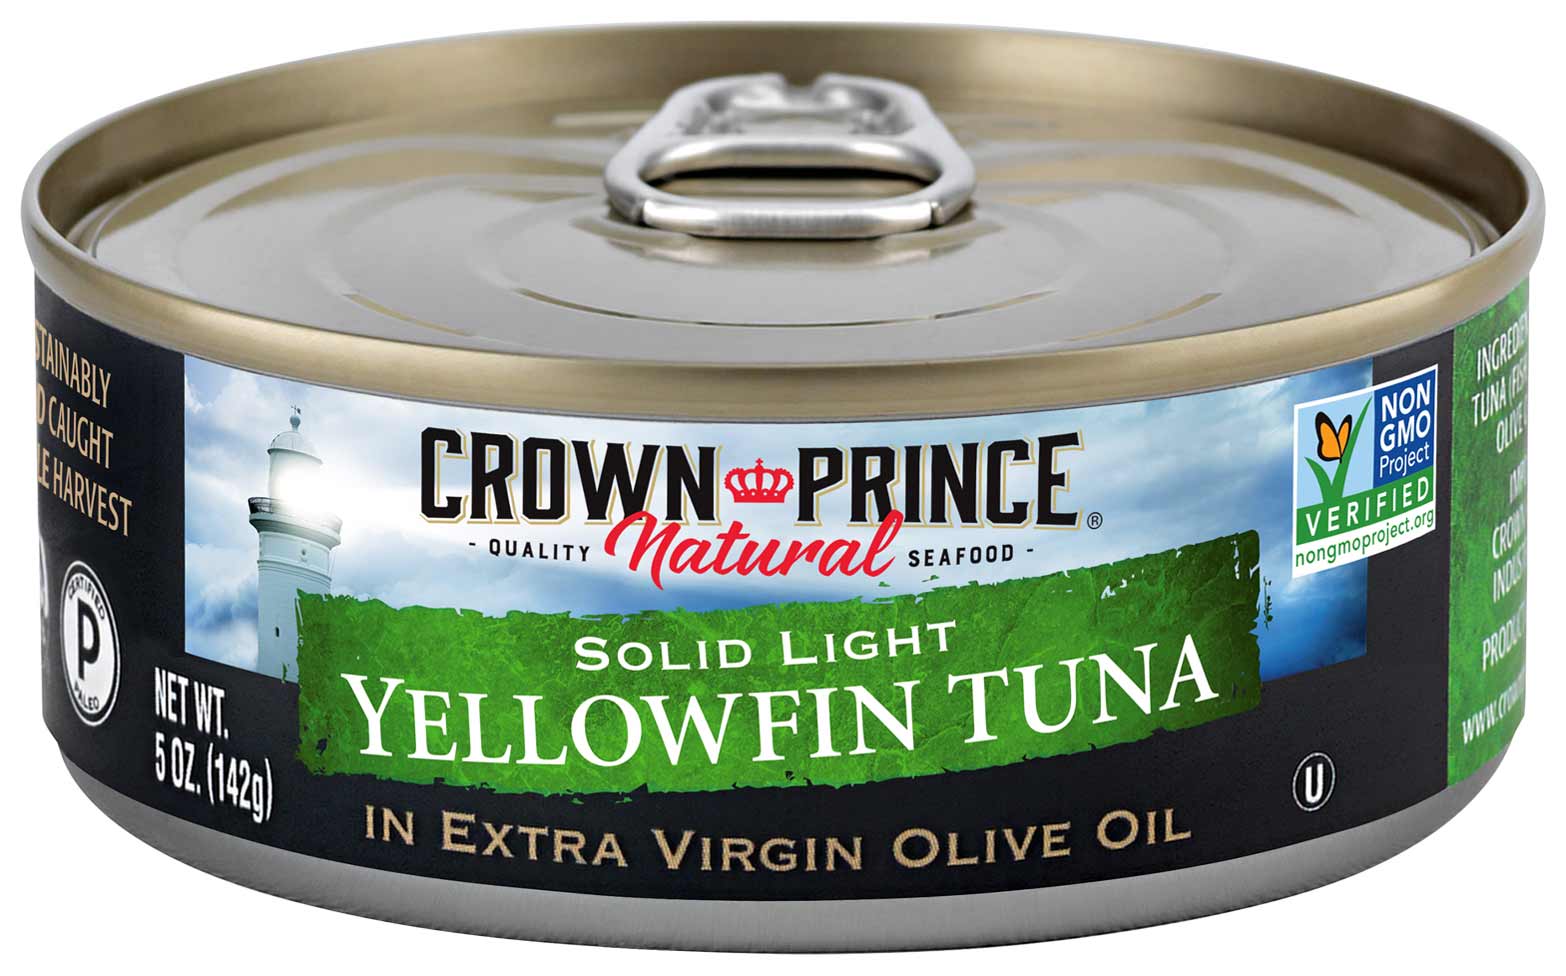 Crown Prince Natural Solid Light Yellowfin Tuna in Extra Virgin Olive Oil